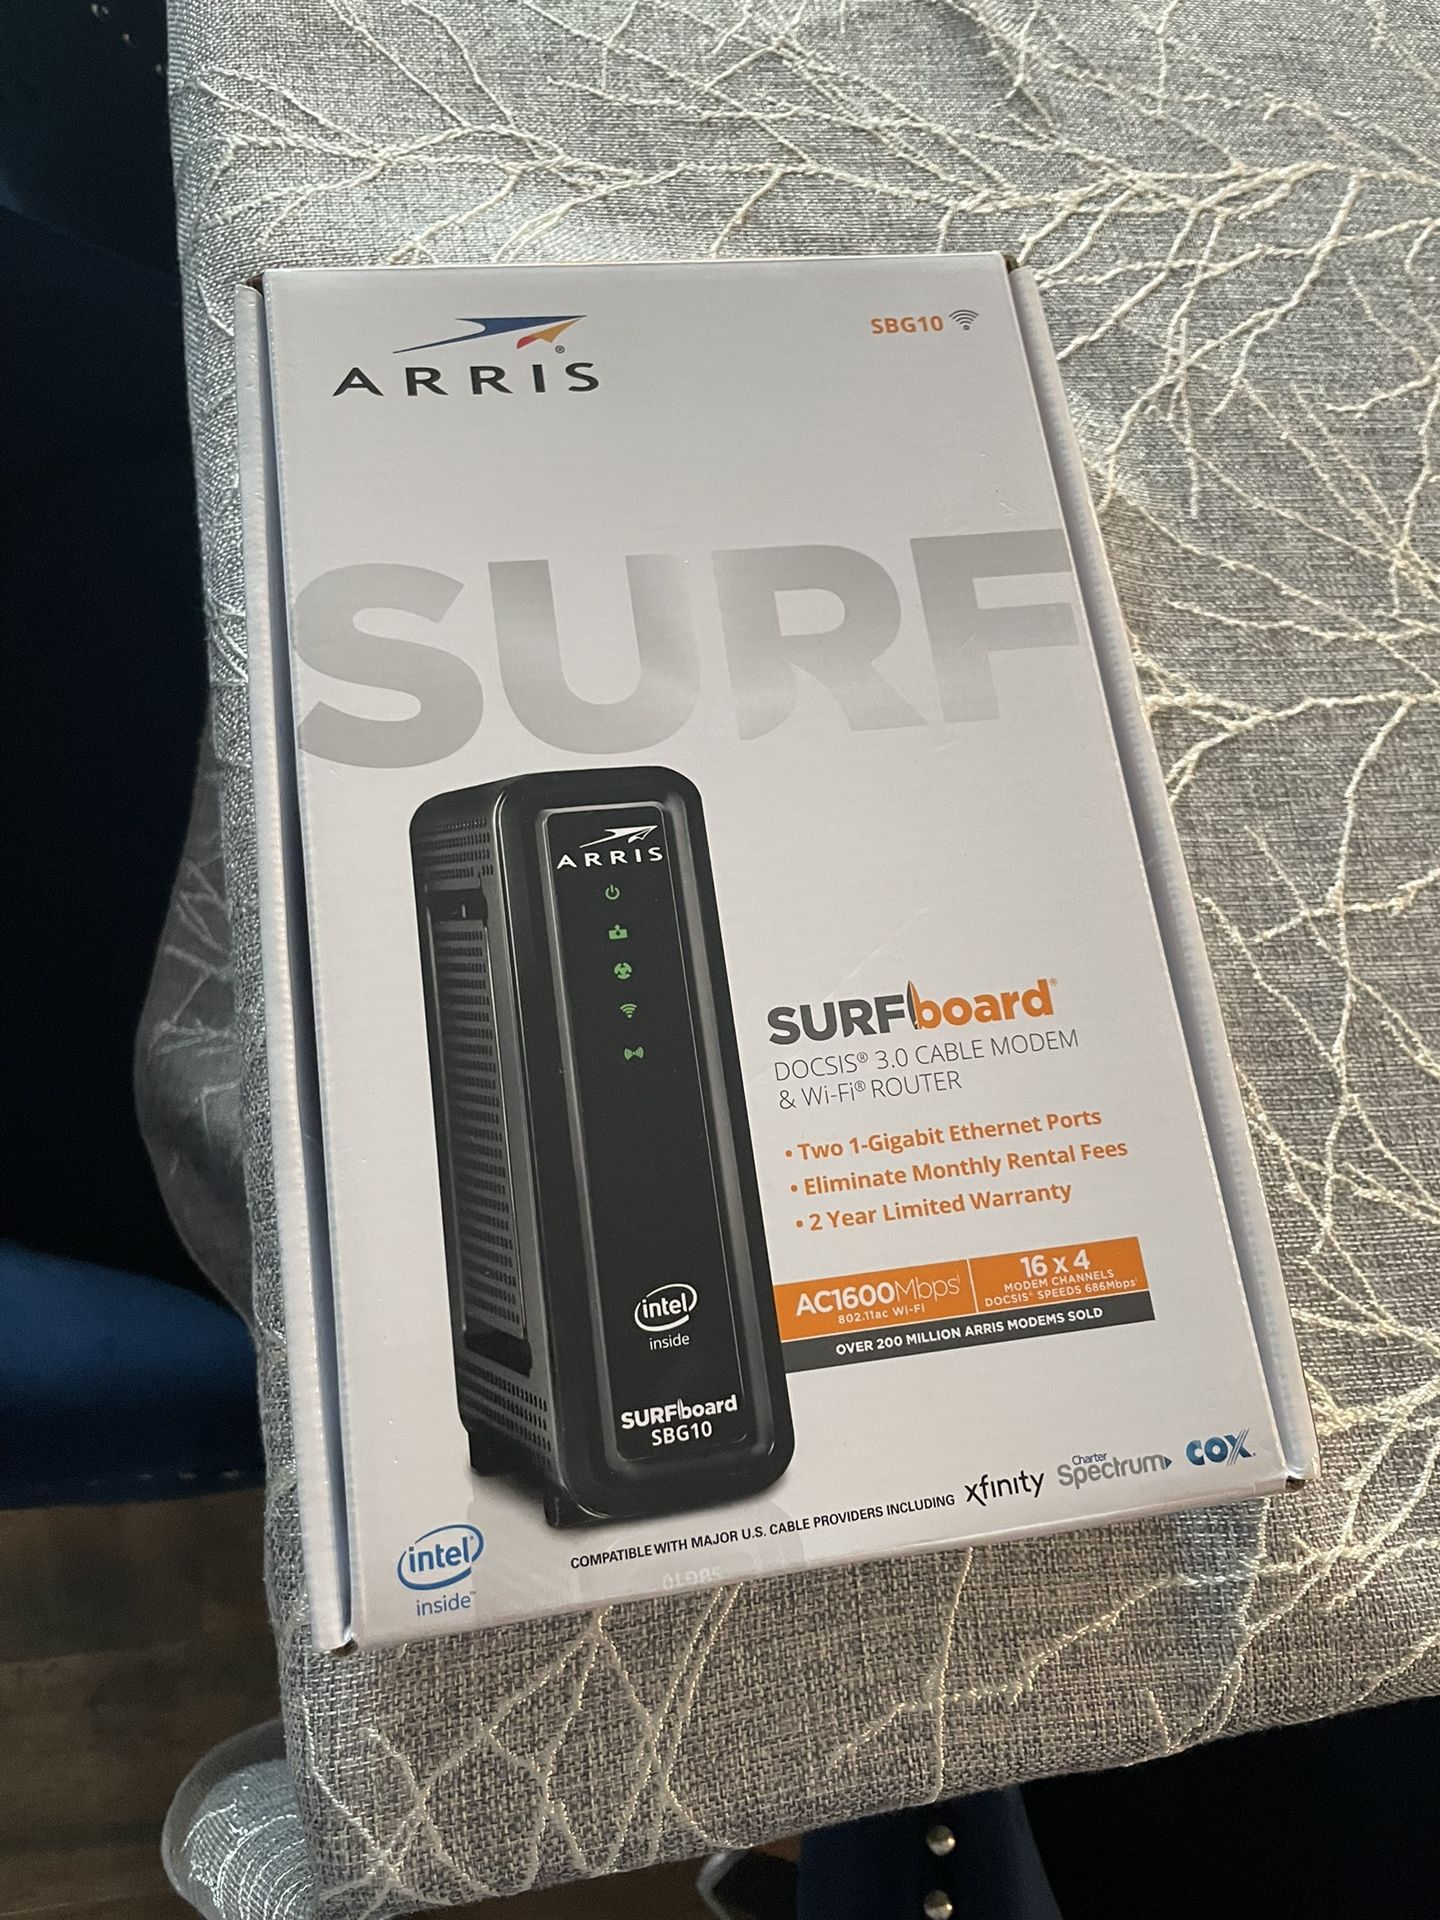 Arris Modem and Wi-Fi Router